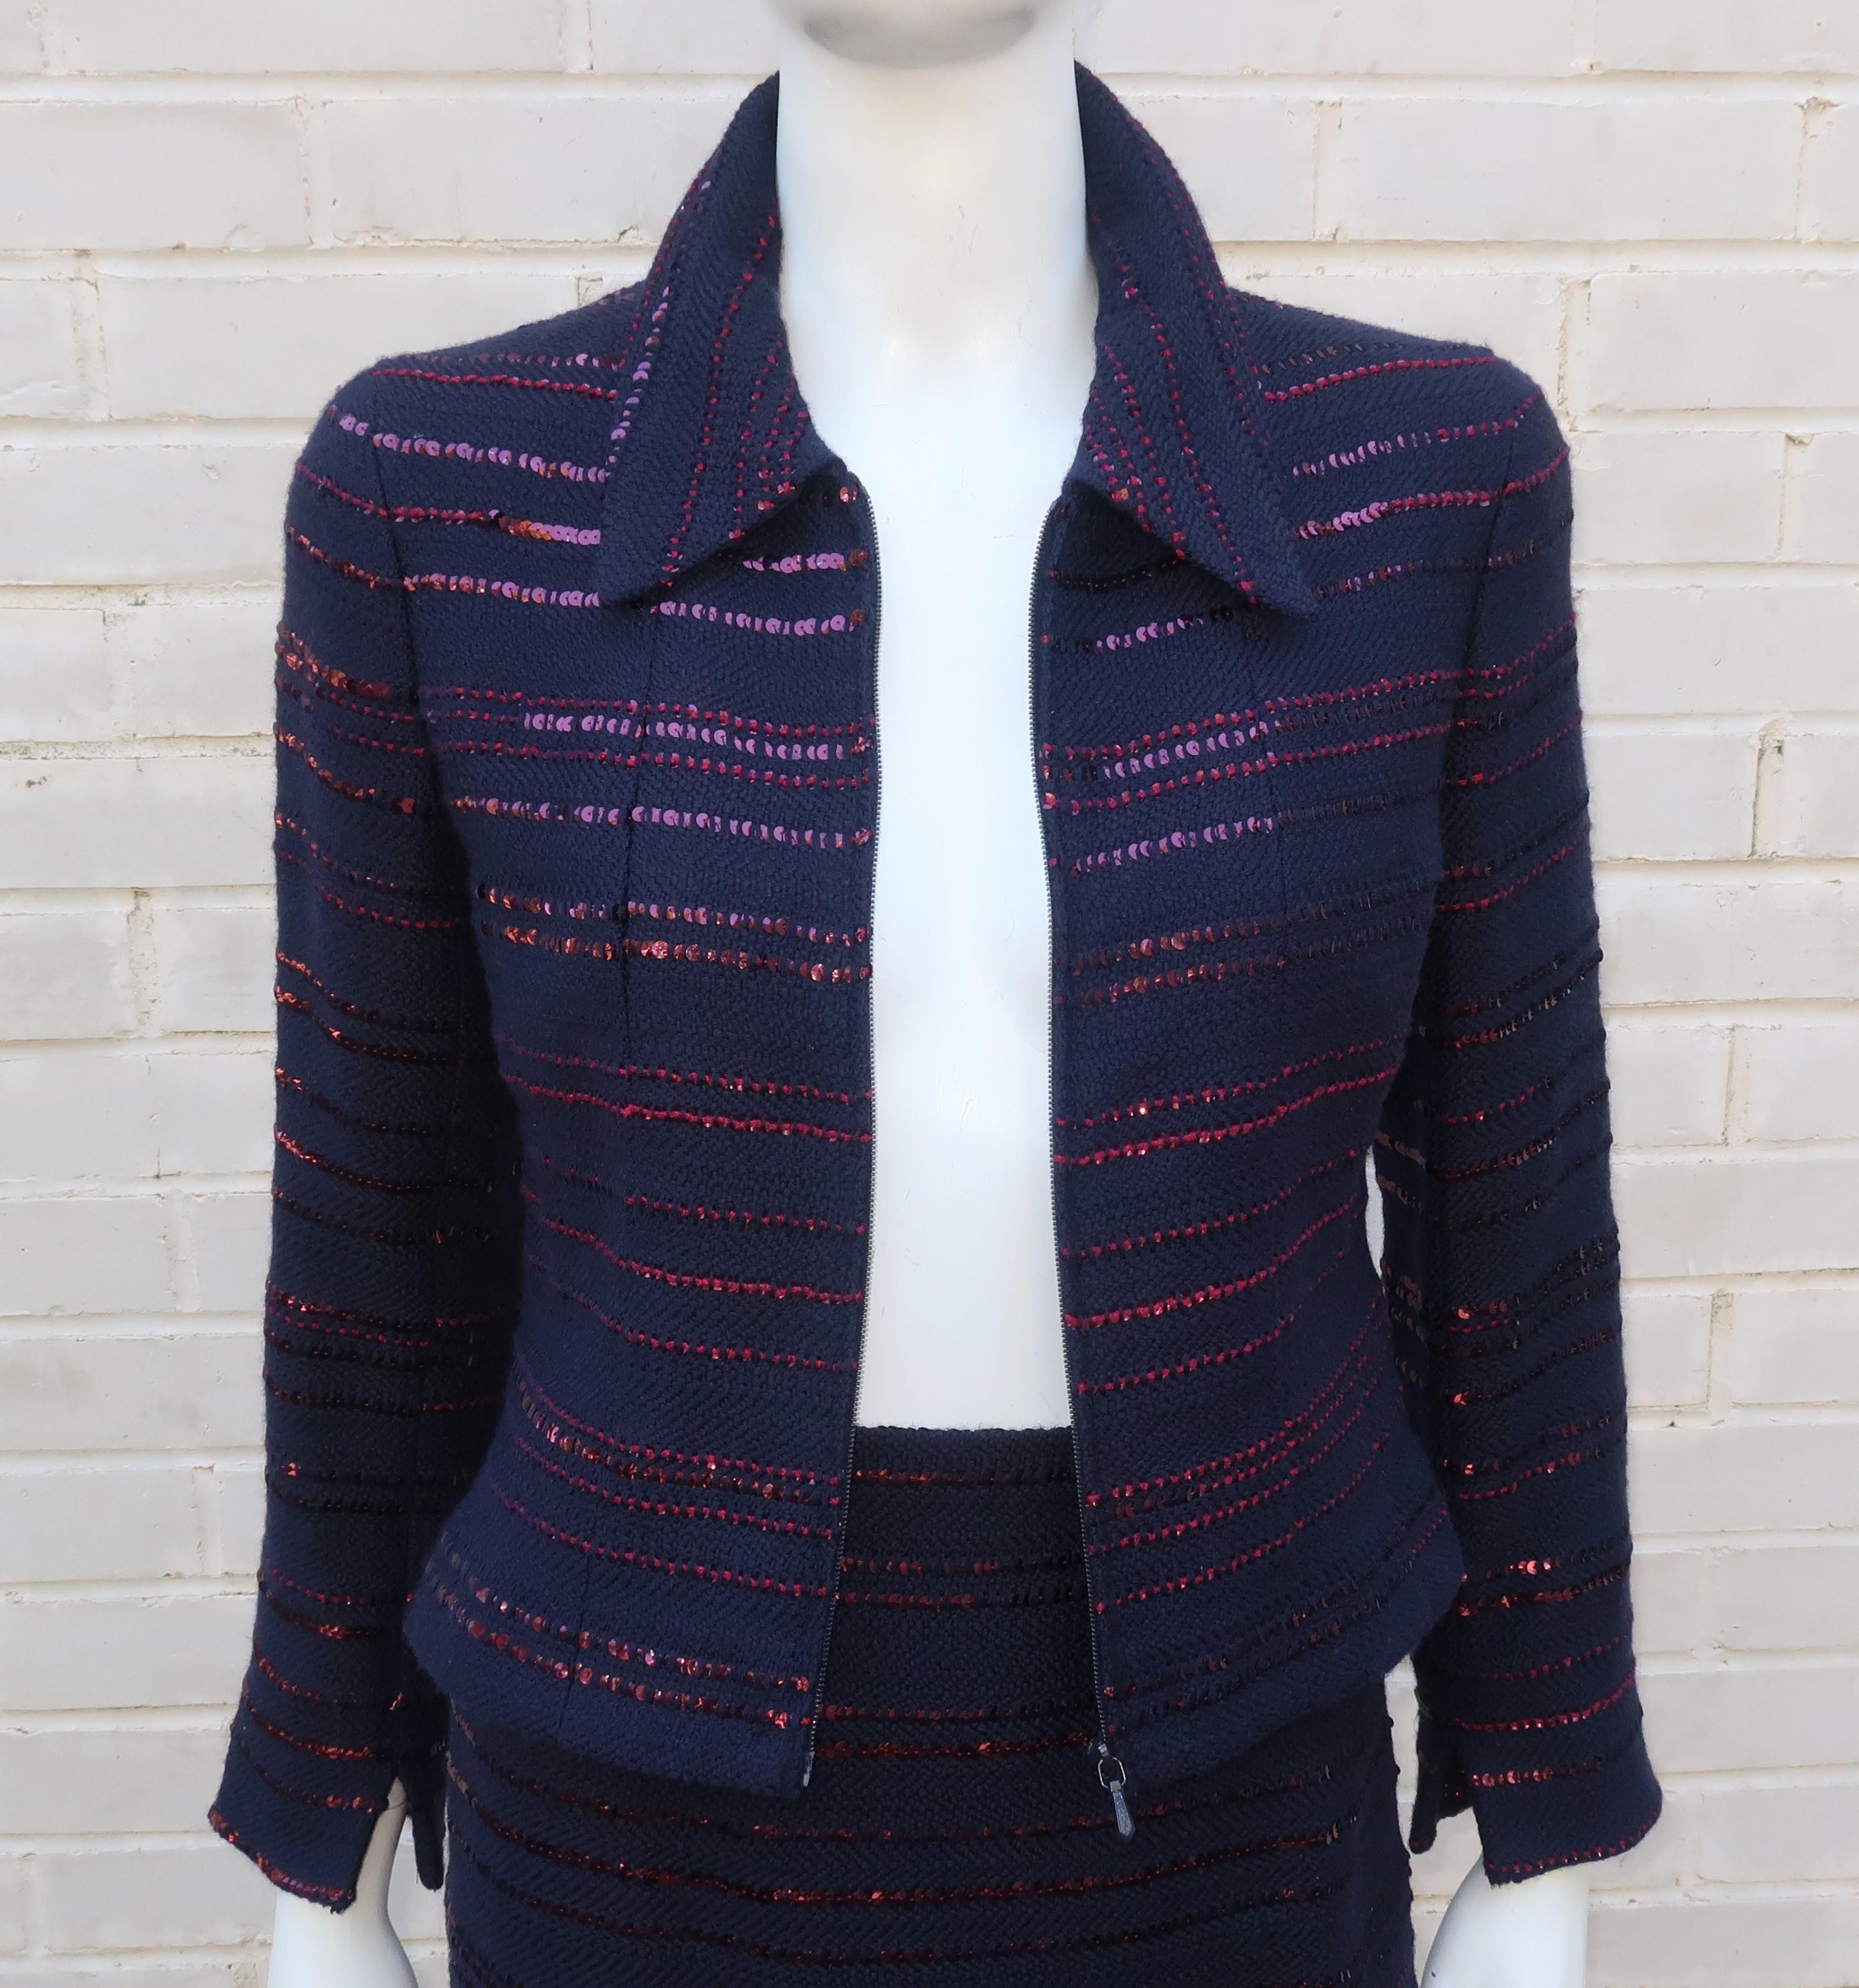 Chanel midnight blue (almost black) two piece skirt and jacket suit in a boucle style wool and cotton blend fabric with rows of horizontal deep ruby red sequins.  The fitted jacket zips at the front with vents at the cuffs and the modified a-line